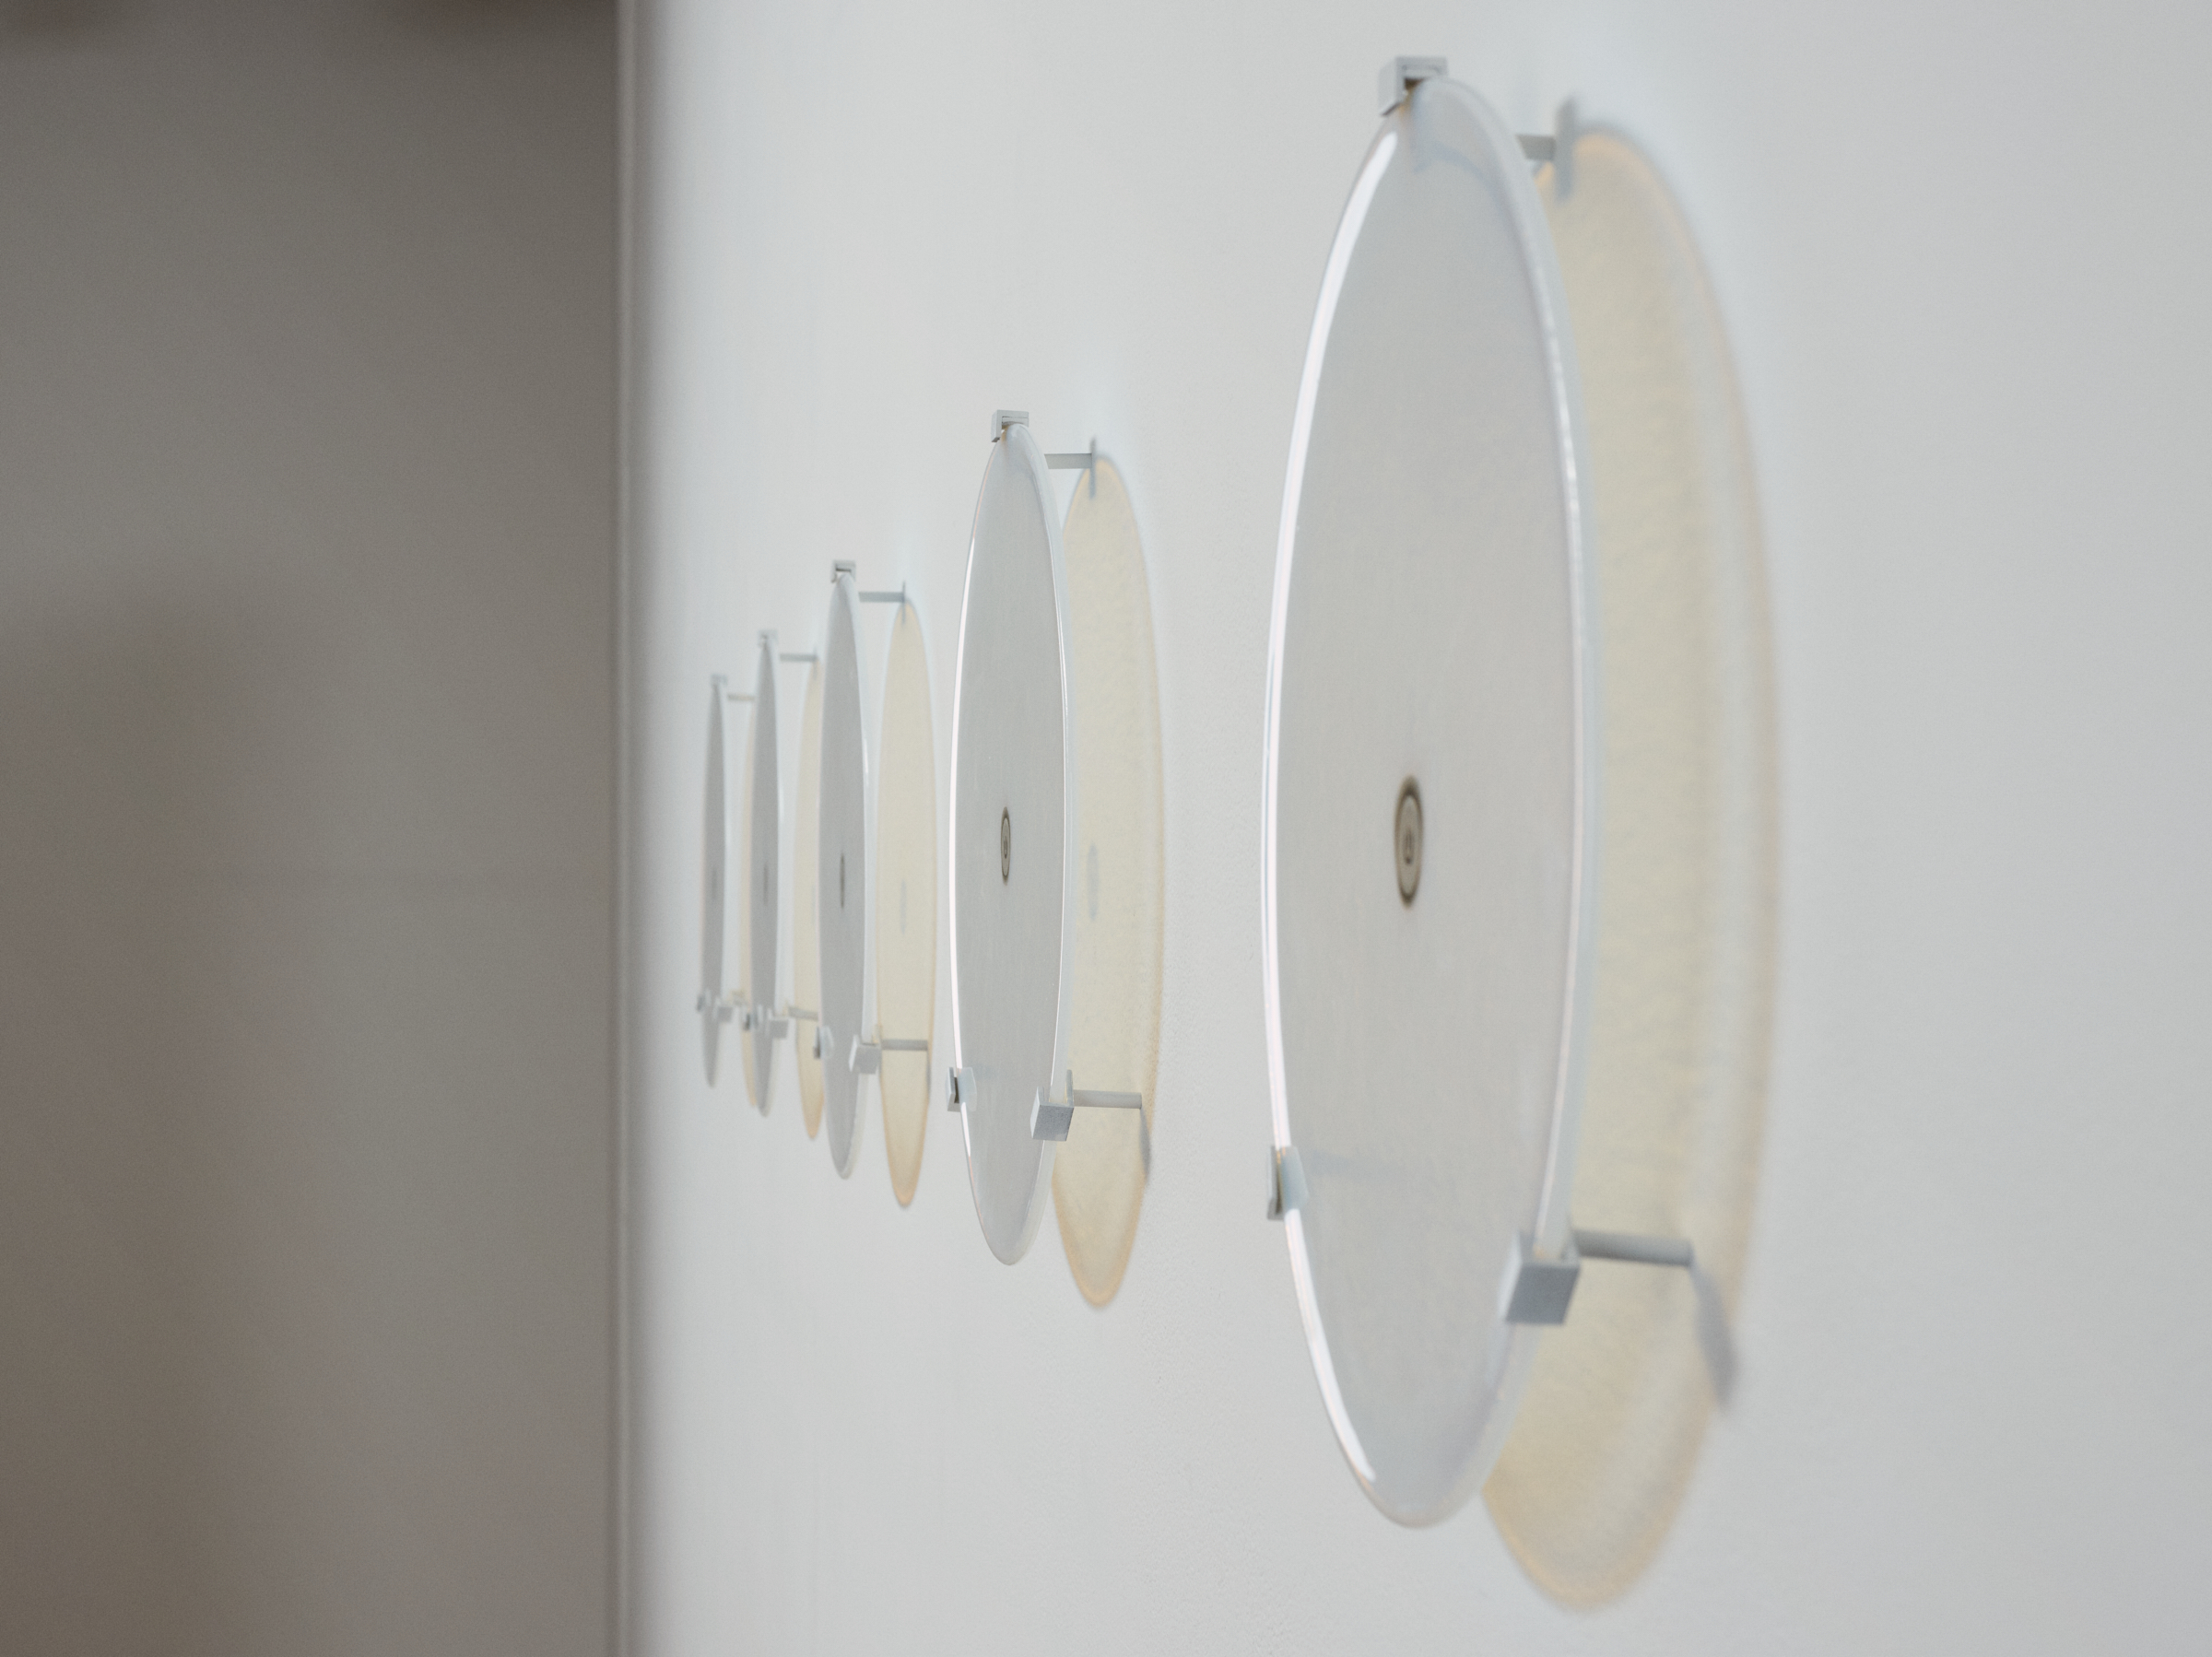 Gallery Installation created with three circular shapes mounted in a horizontal line